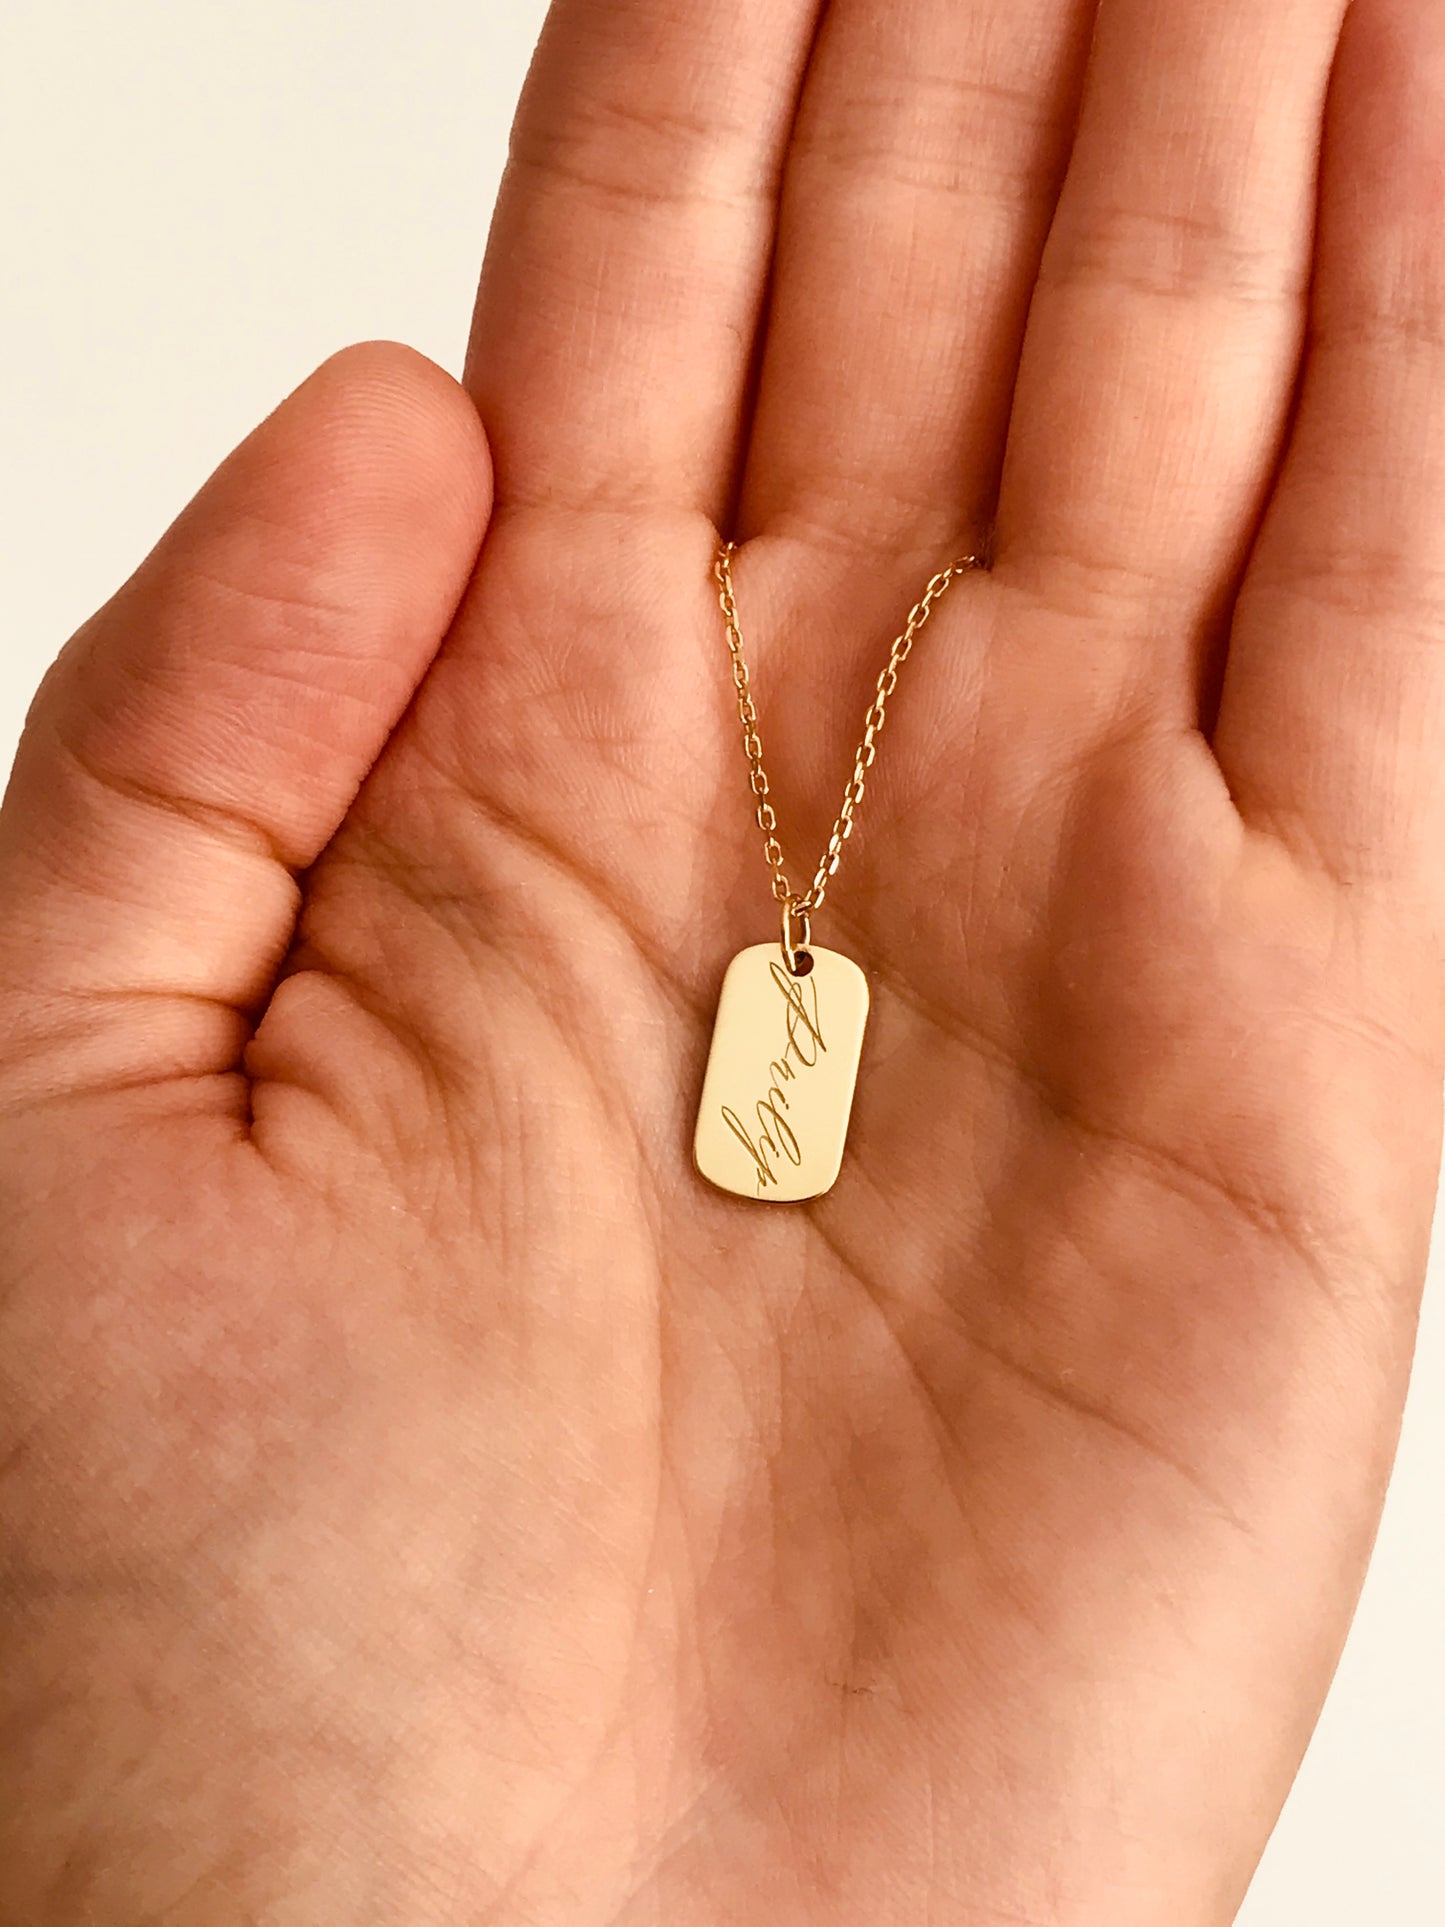 BABY TAG necklace - BYVELA jewellery